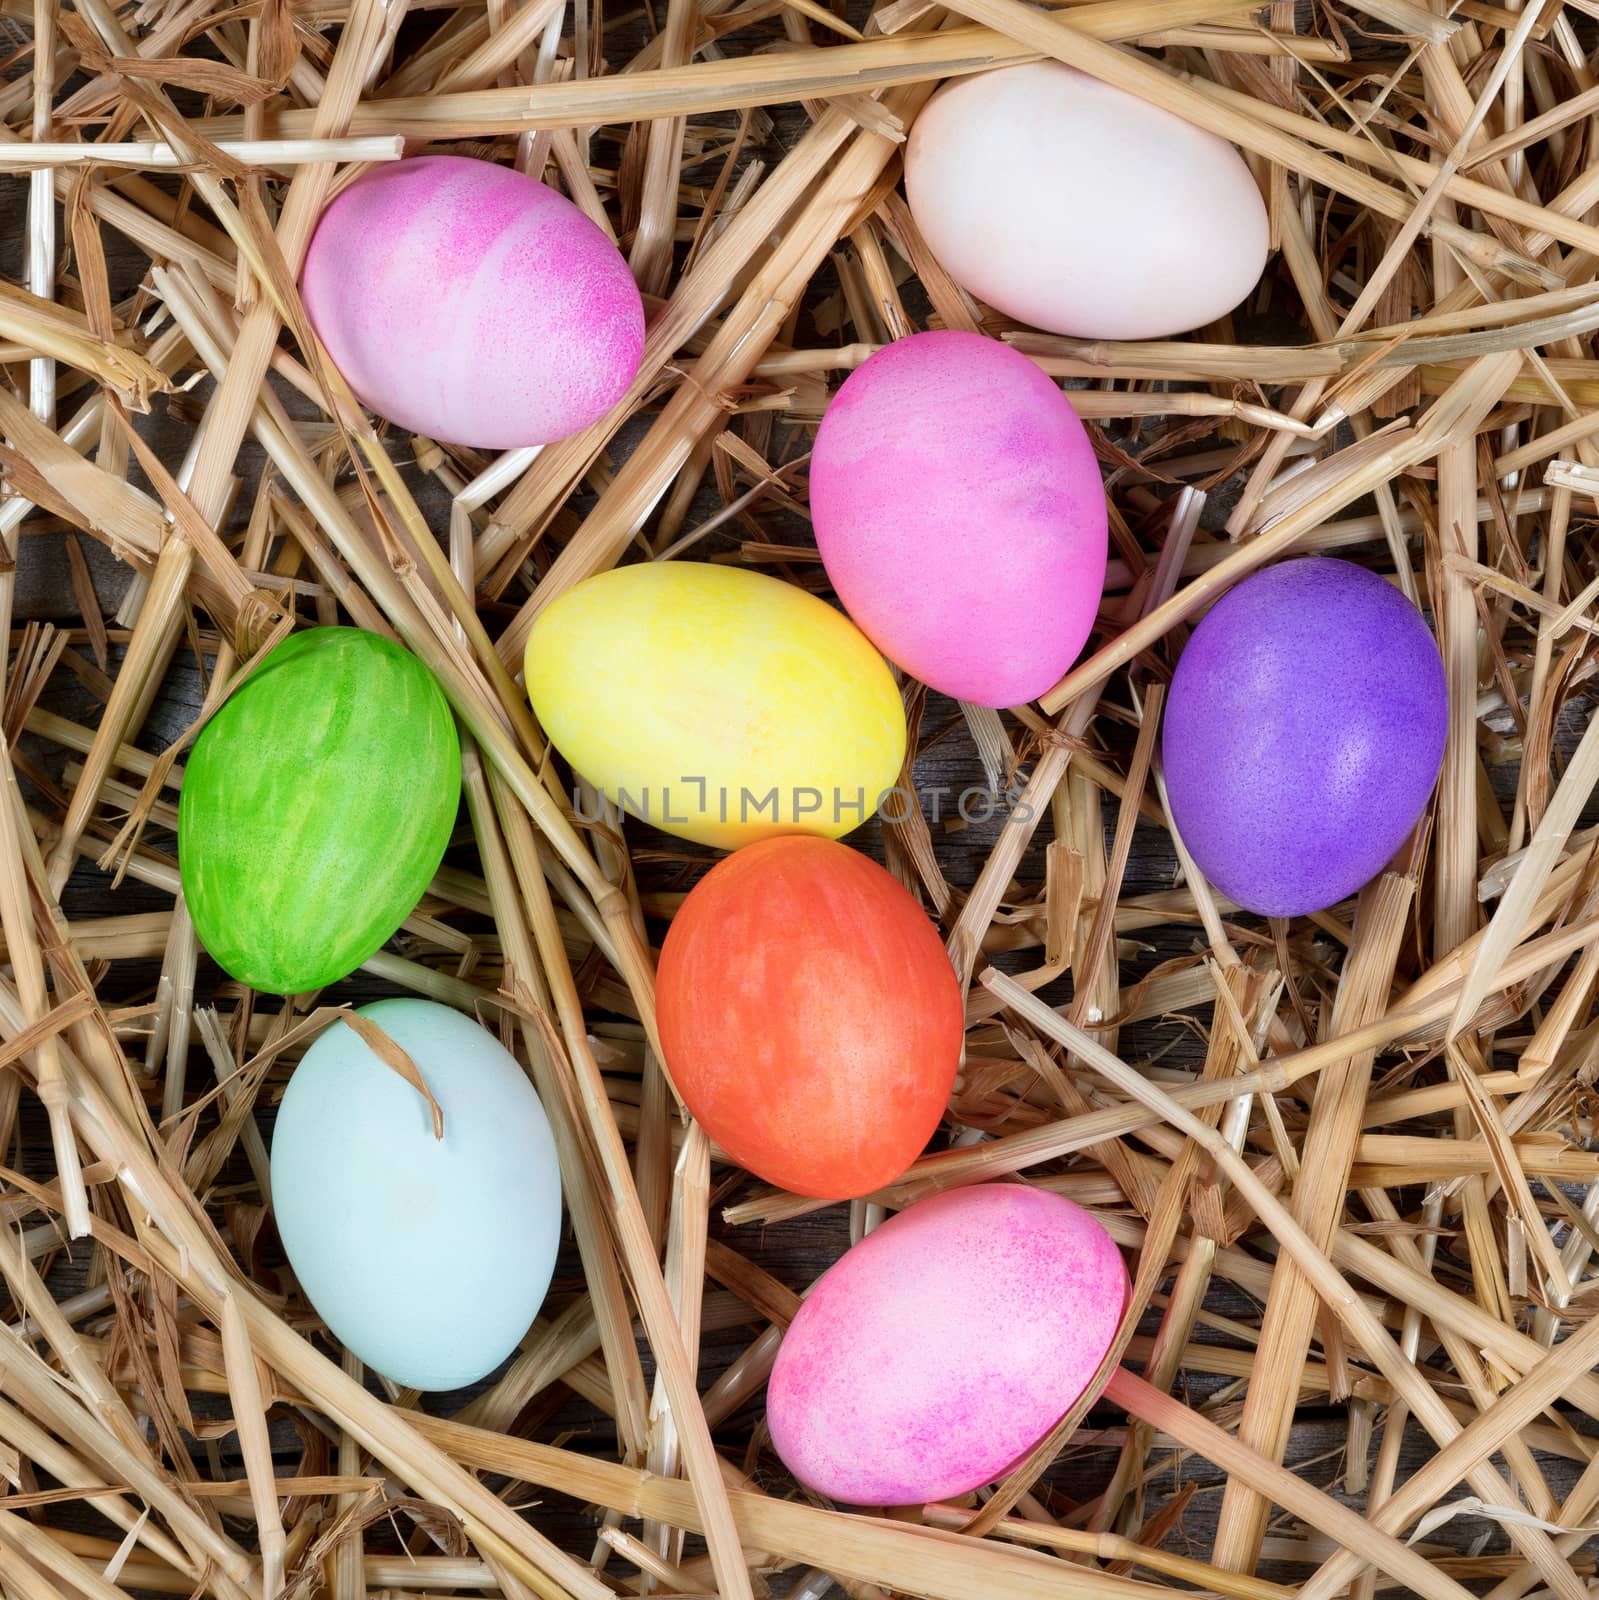 Colorful eggs for Easter holiday on natural straw and rustic woo by tab1962